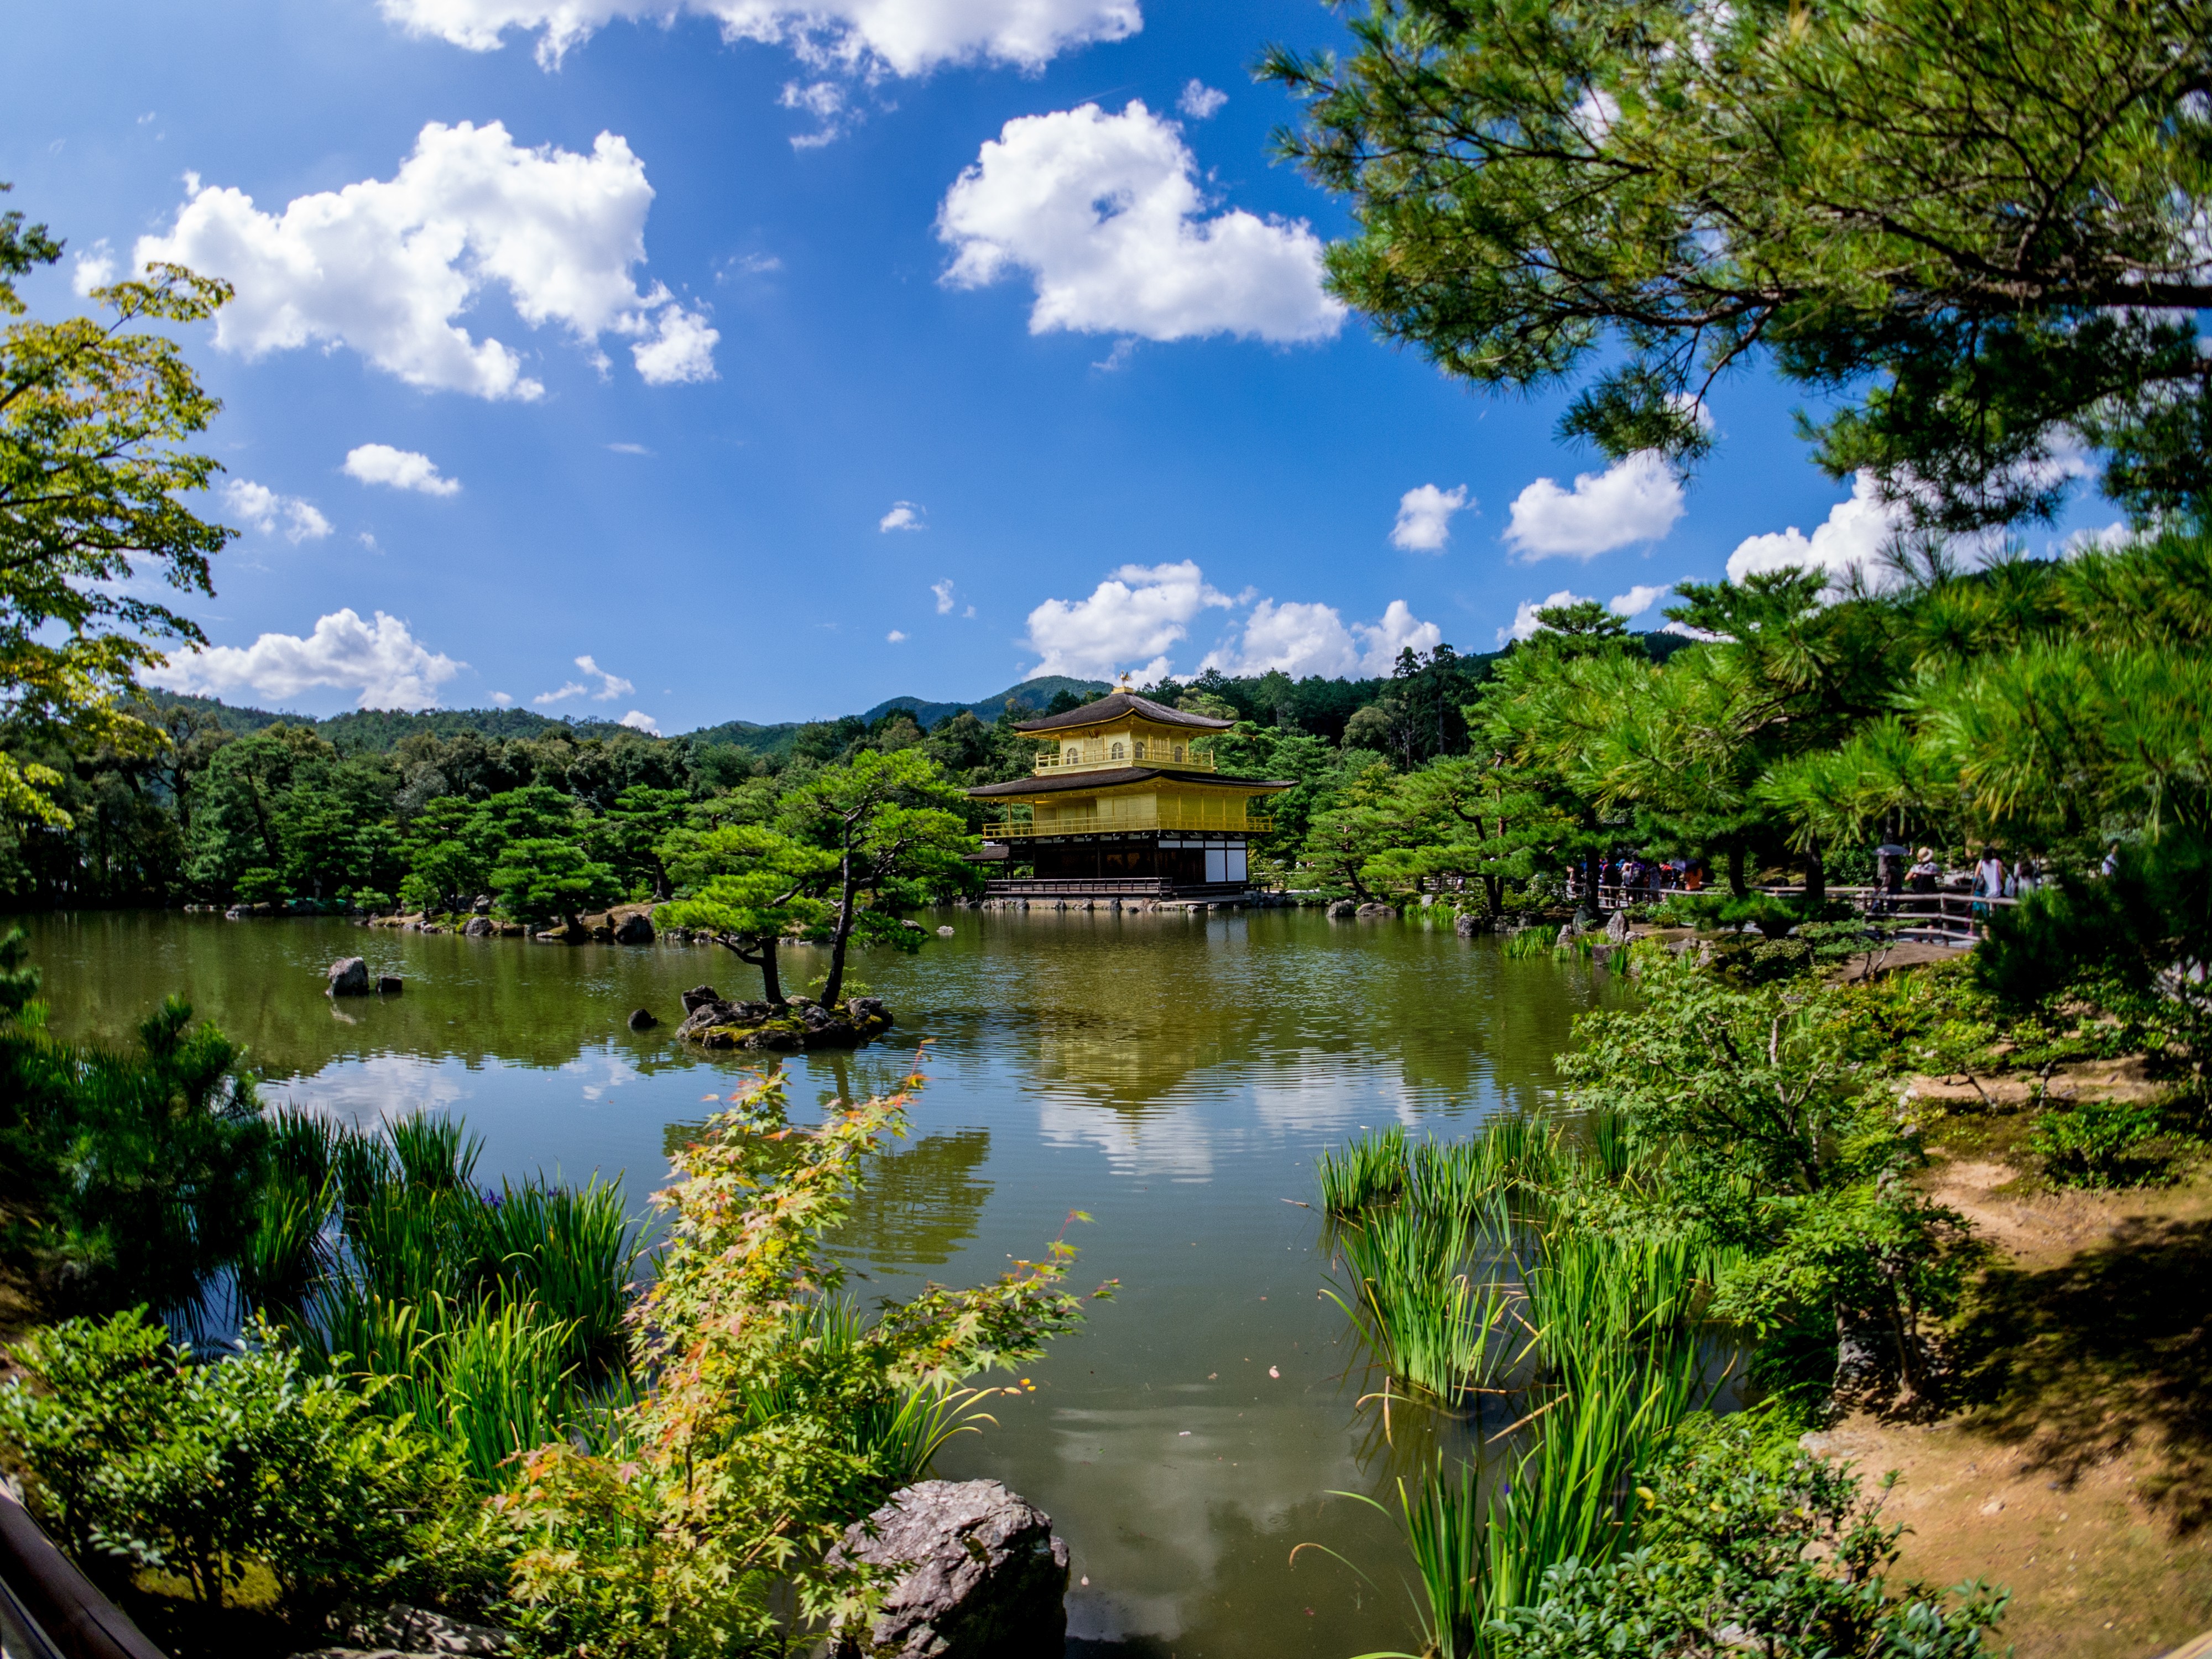 General 4000x3000 Japan Kyoto pagoda pond garden Asian architecture Asia outdoors plants water clouds